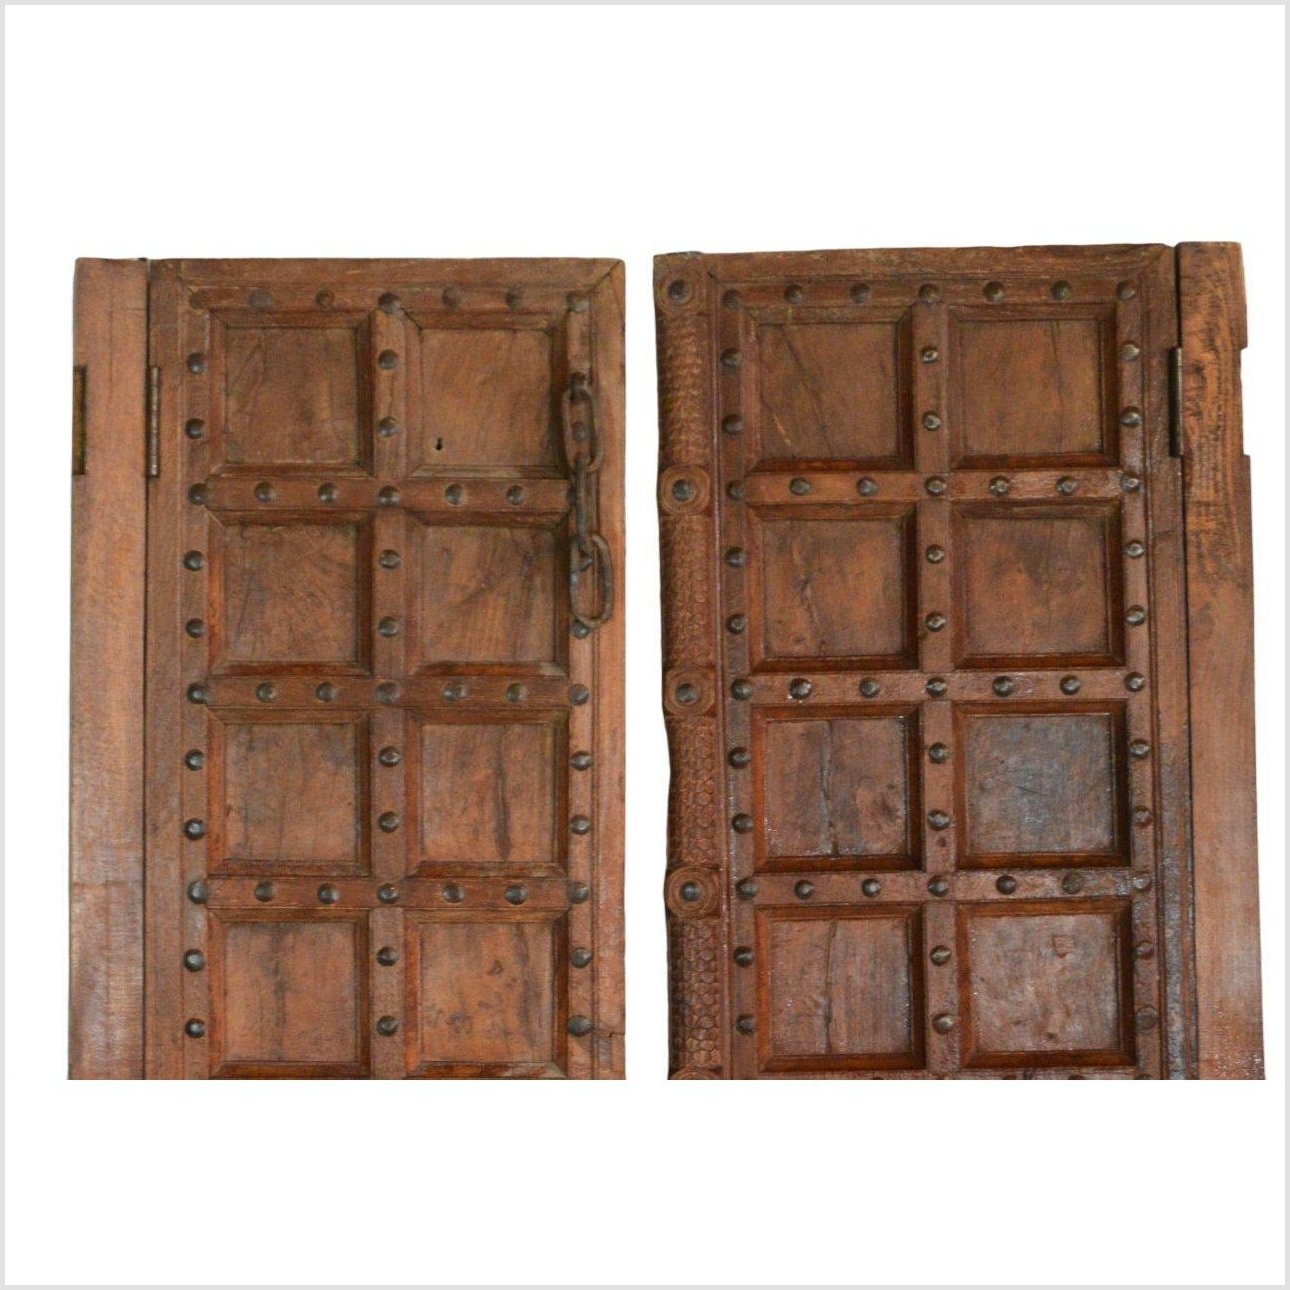 Hand-Carved Wooden Panel Doors-YN2928-2. Asian & Chinese Furniture, Art, Antiques, Vintage Home Décor for sale at FEA Home